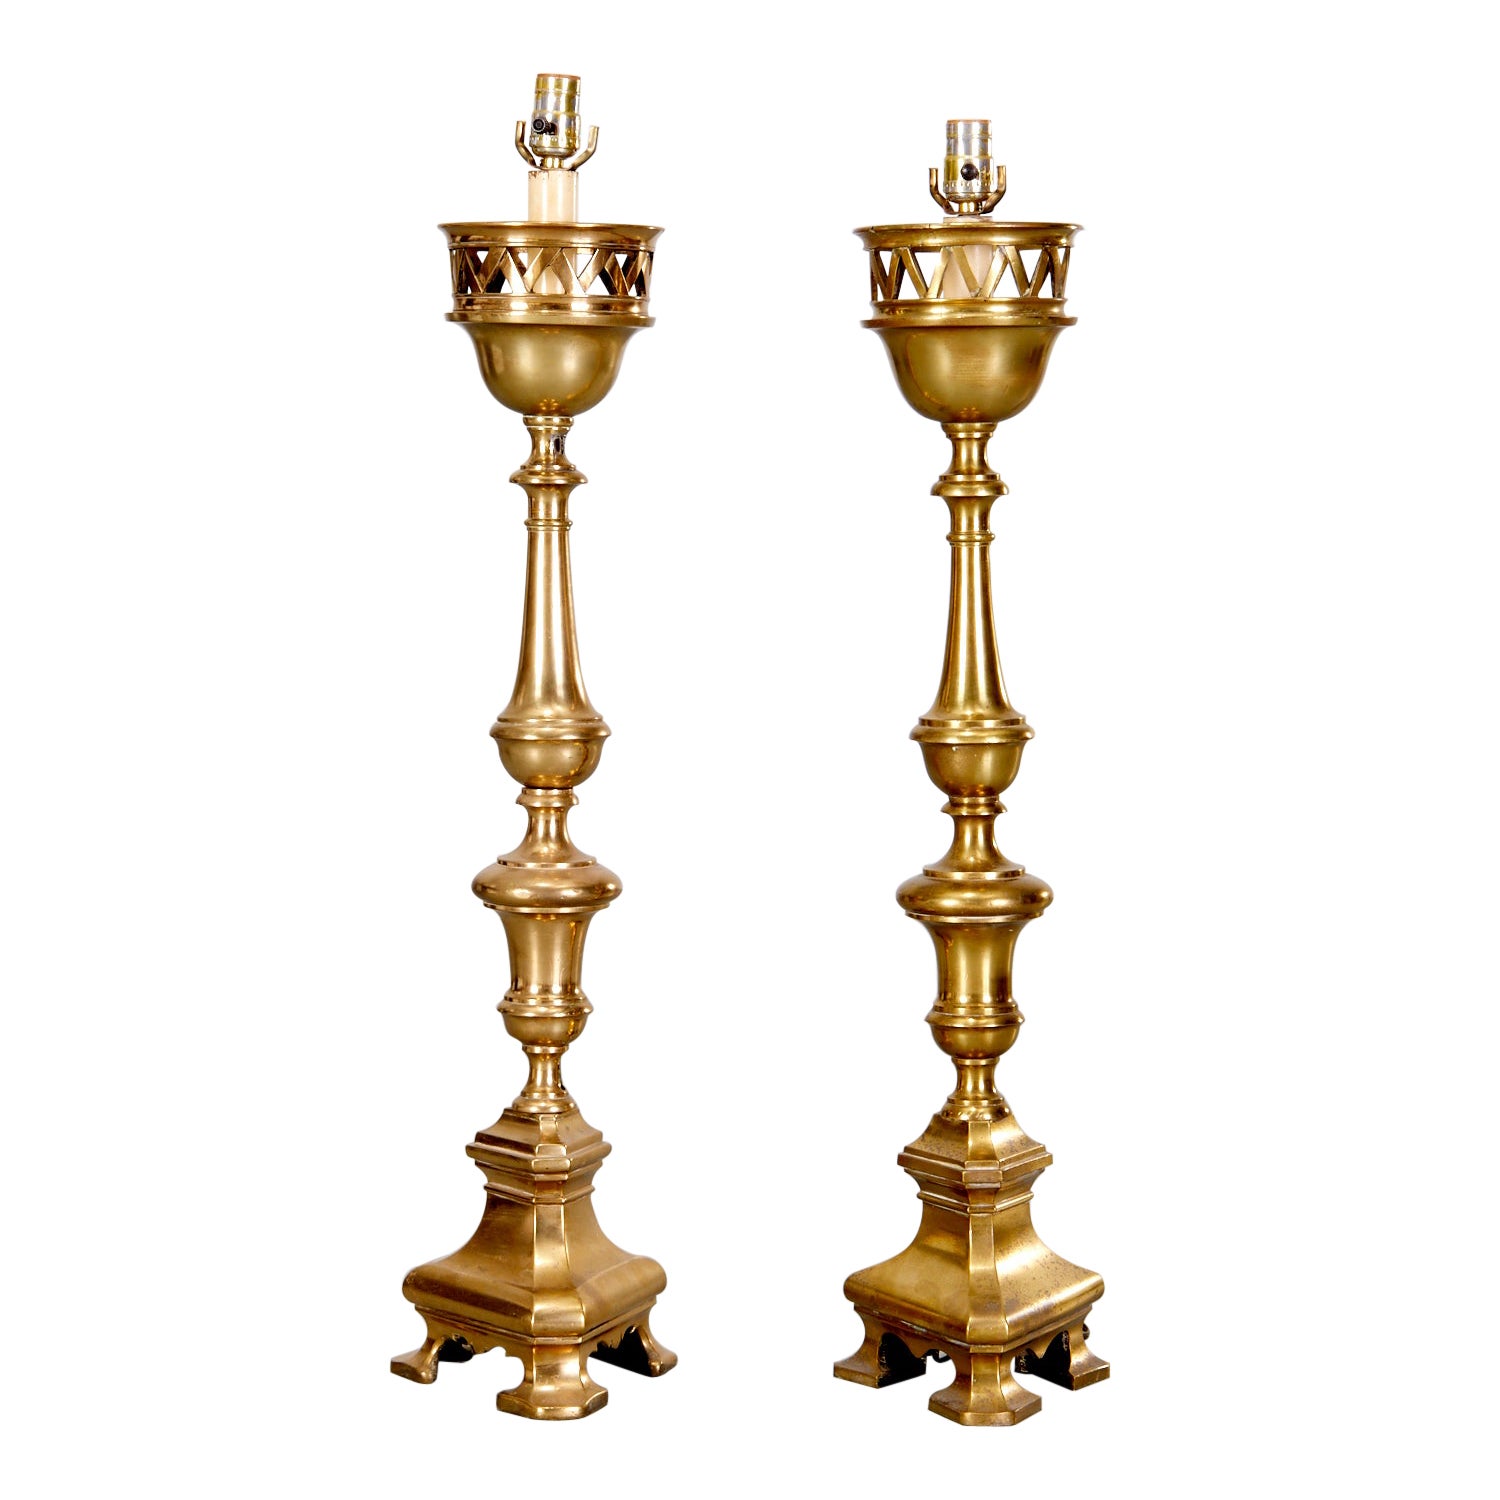 19th C. Pair of Heavy Brass Ecclesiastical Candlesticks Adapted to Table Lamps